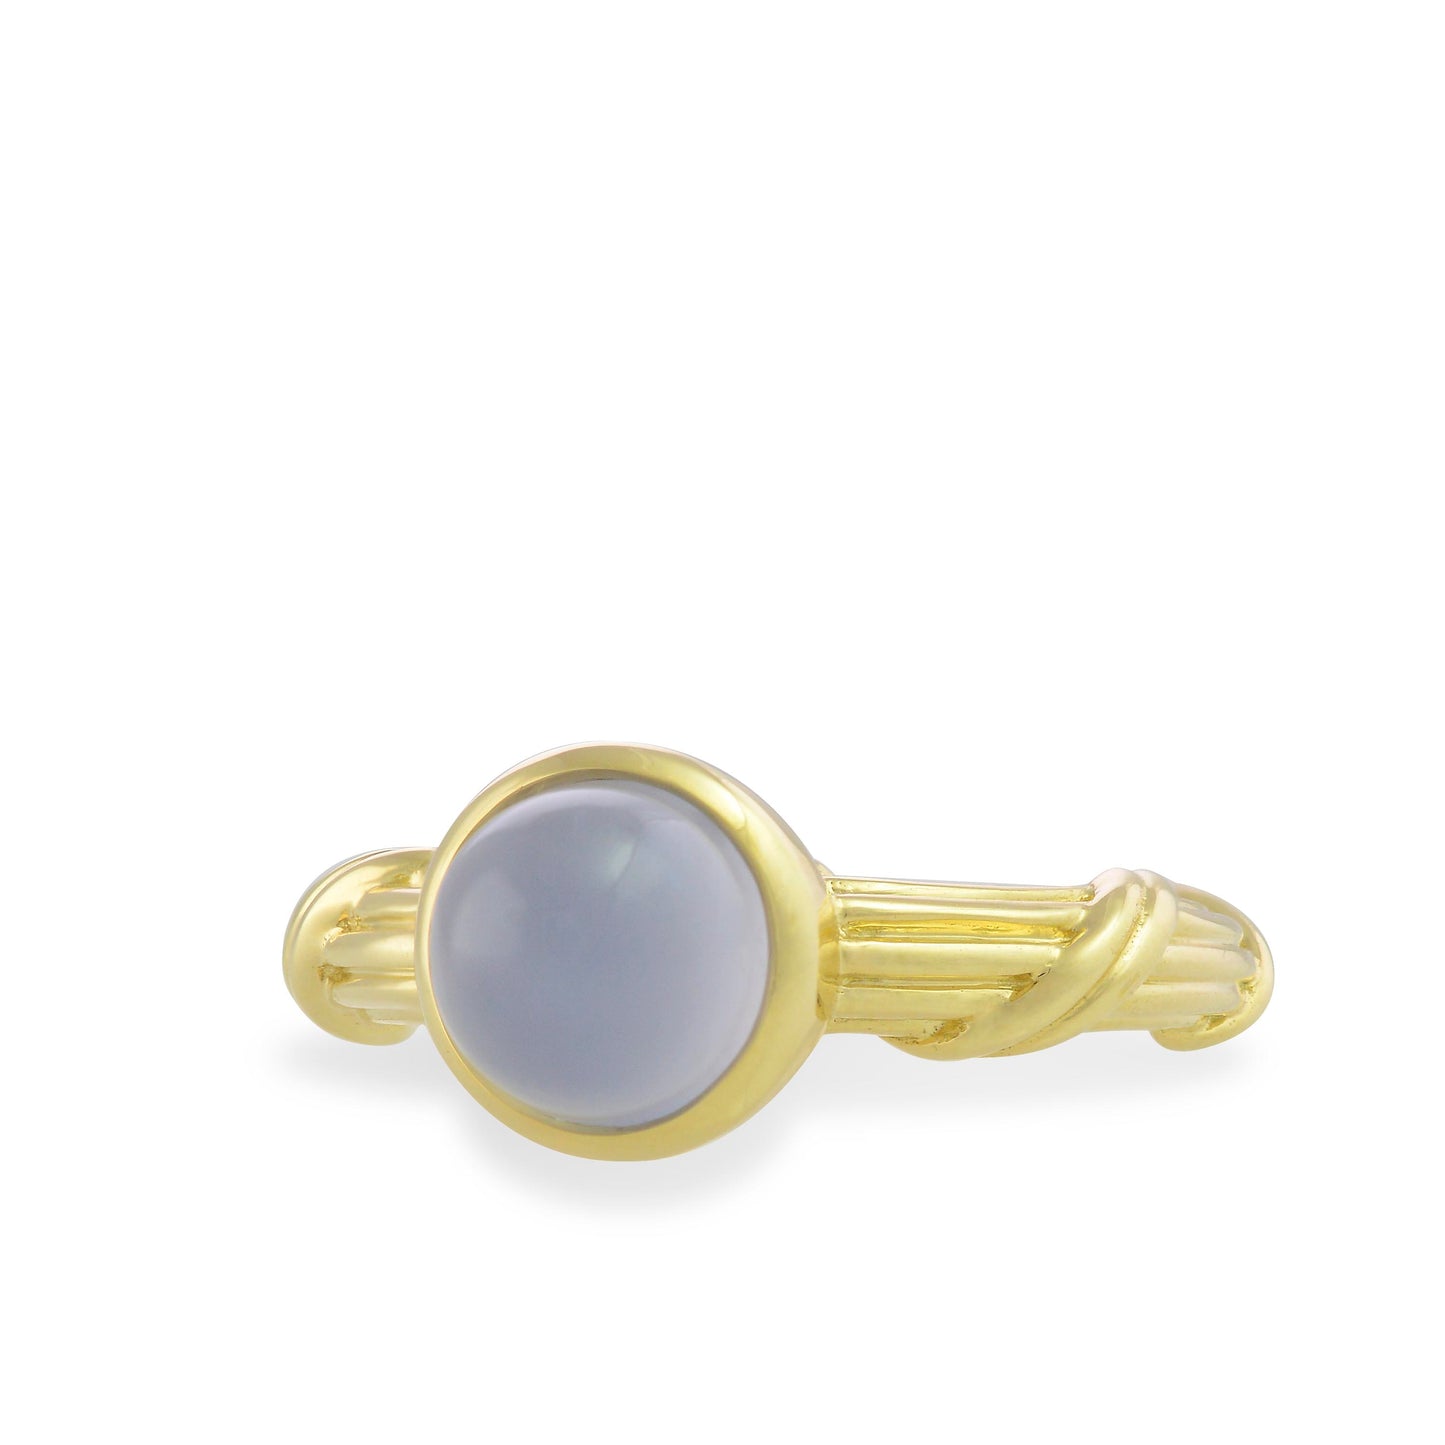 Chalcedony Bezel Set Cabochon Ring in 18K yellow gold